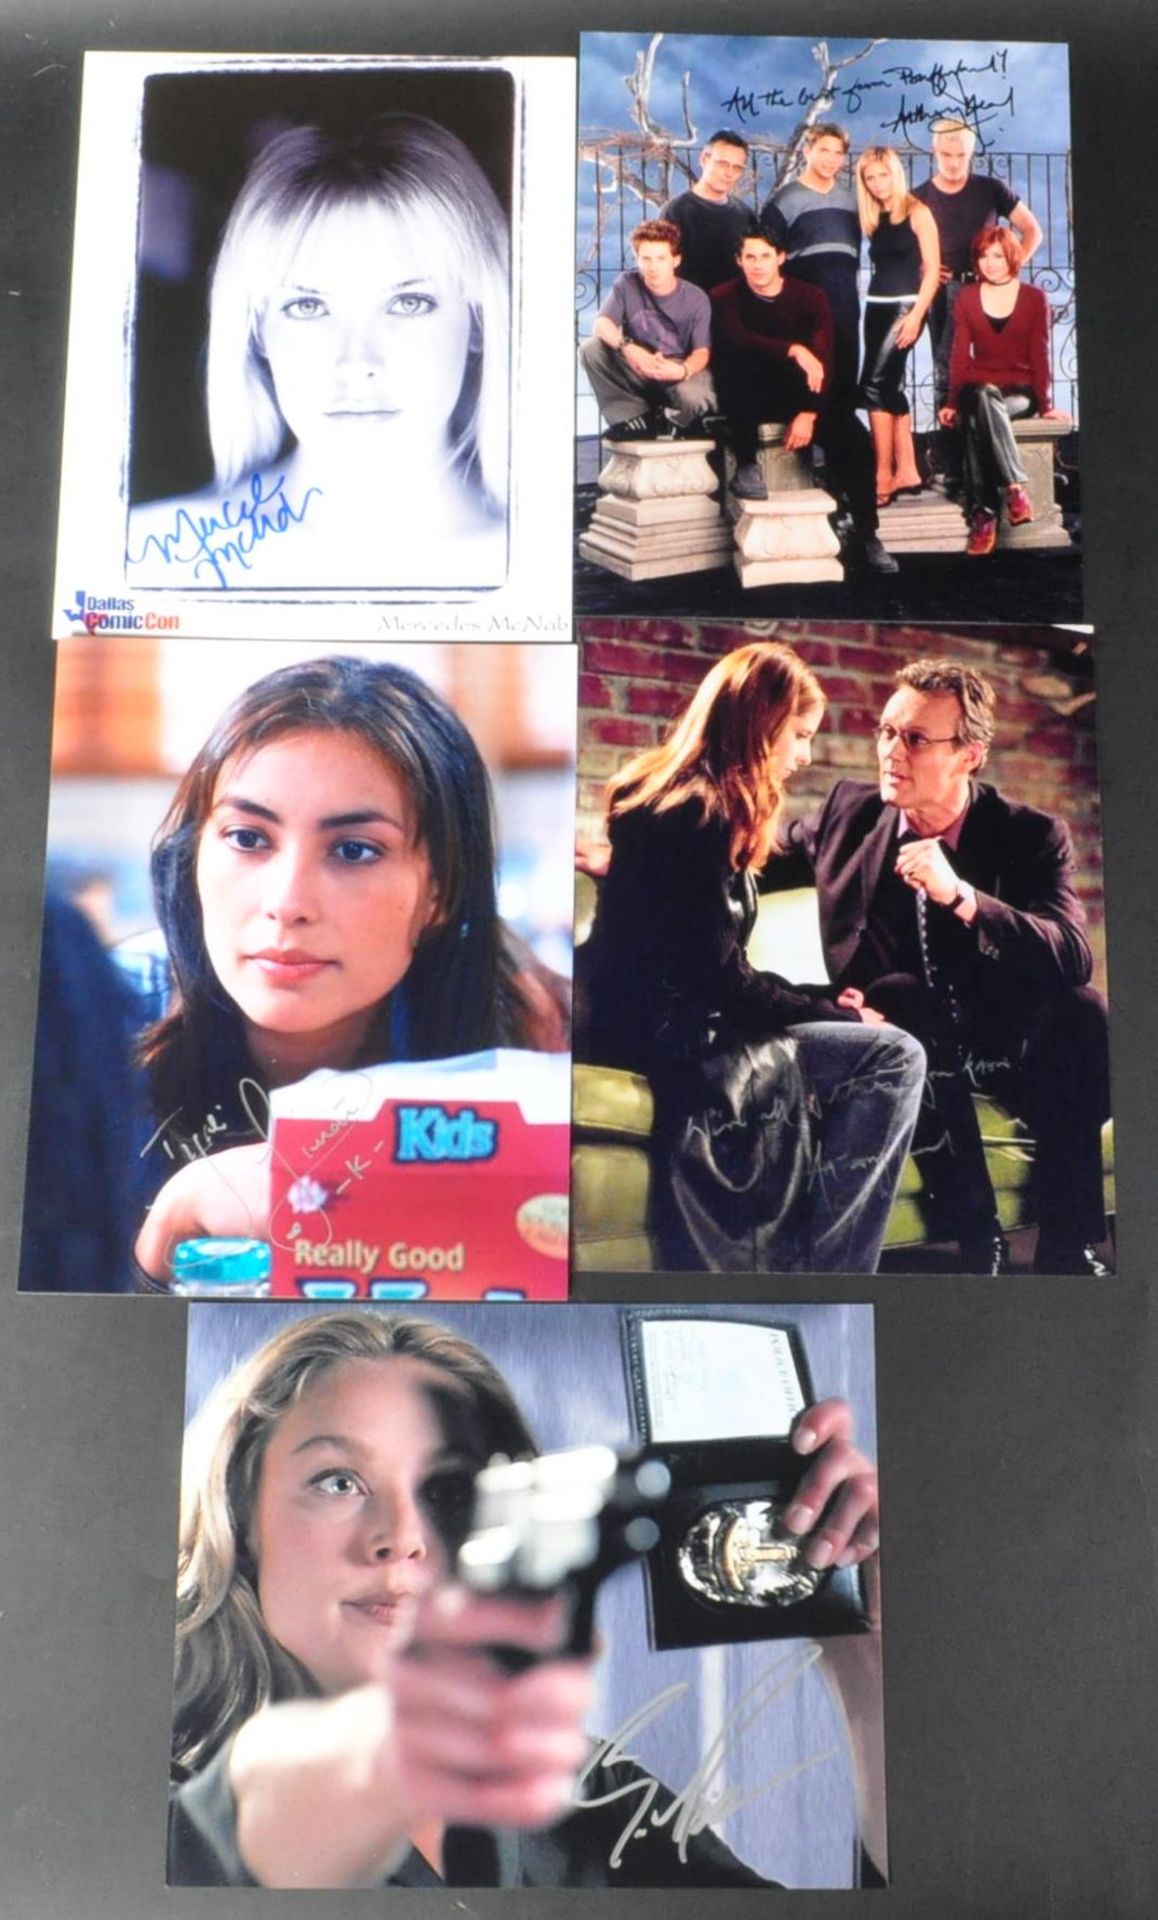 BUFFY THE VAMPIRE SLAYER - COLLECTION OF AUTOGRAPHS - Image 2 of 4